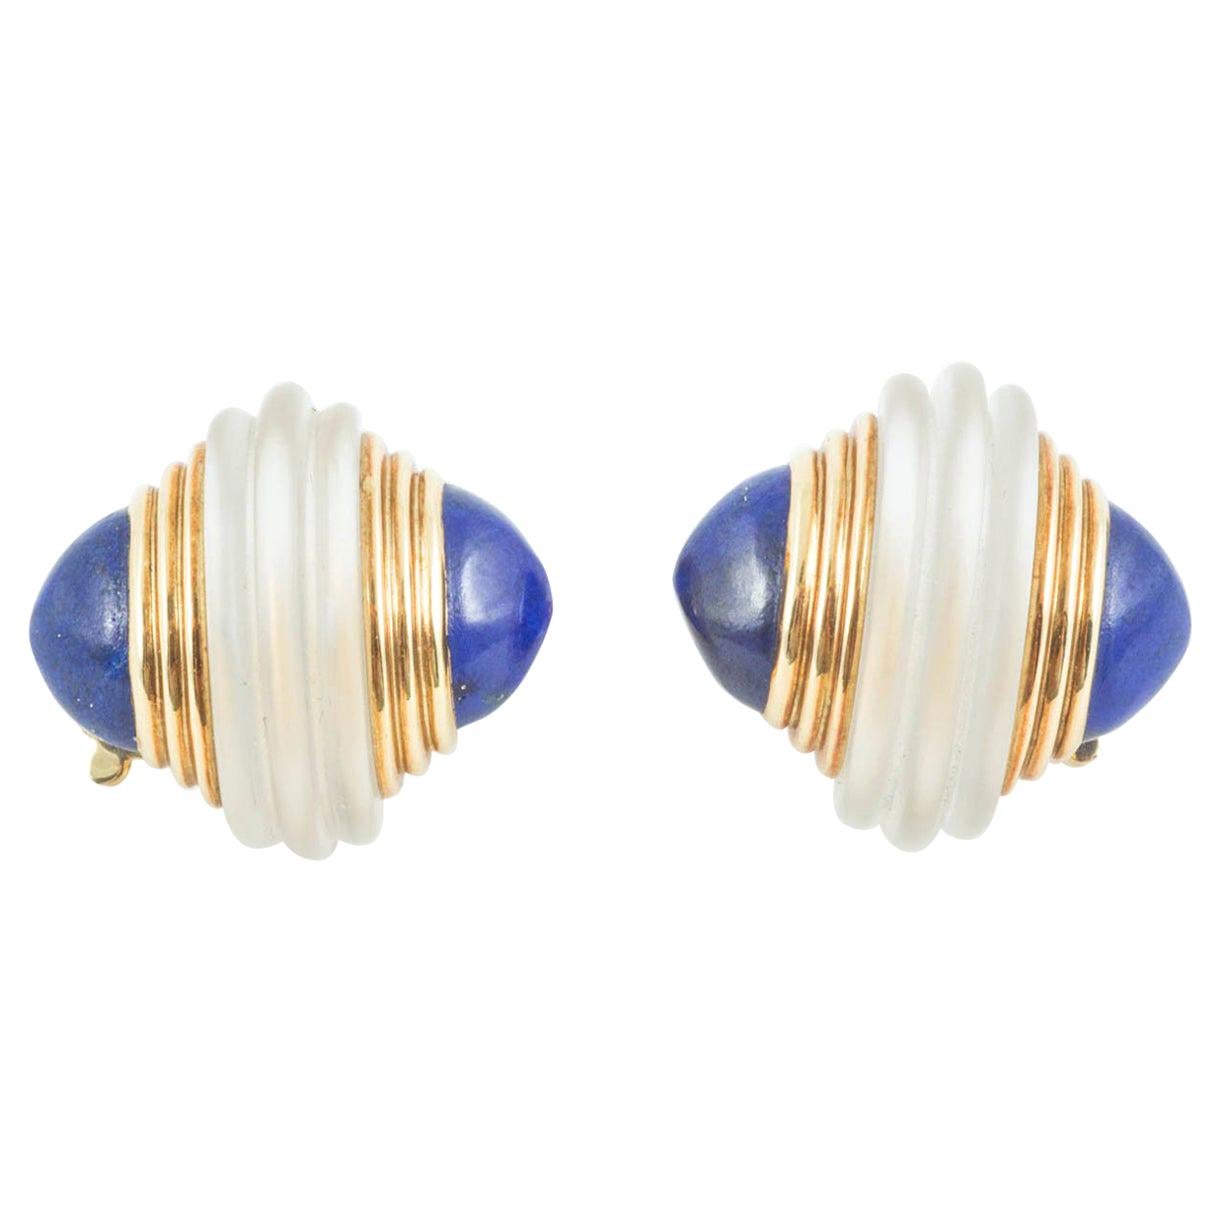 Boucheron Clip Earrings, Frosted Crystal & Lapis Lazuli in 18k Gold, French 1950 For Sale